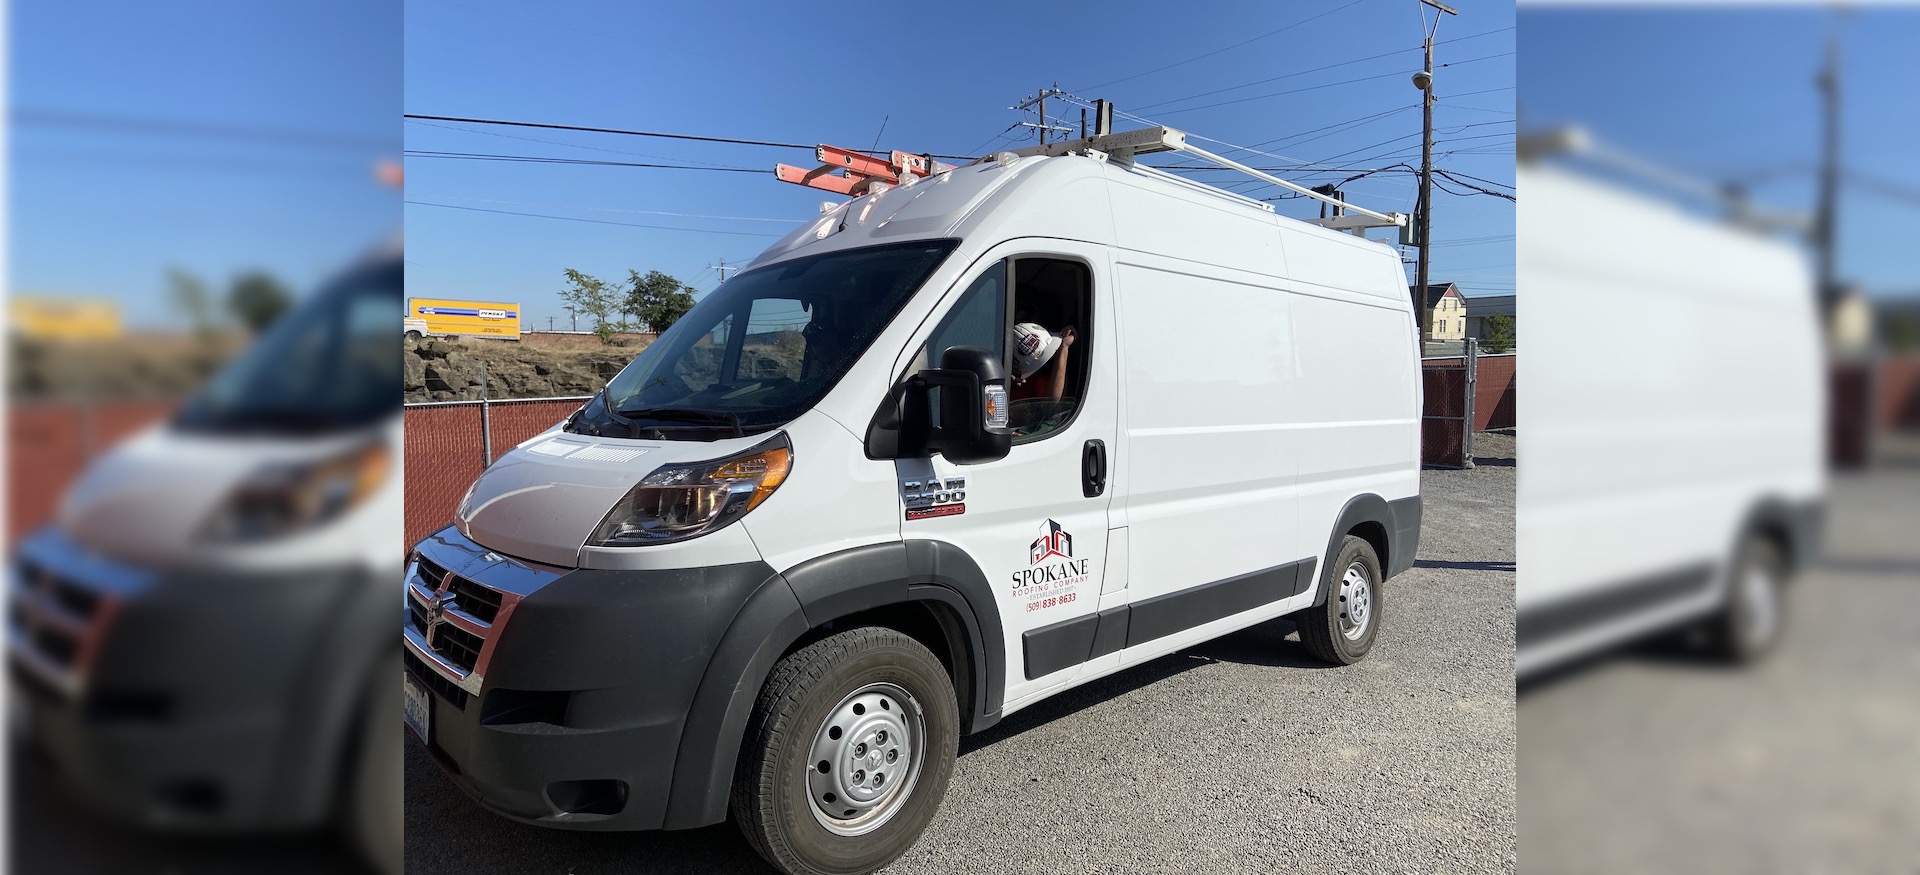 Spokane Roofing Company Commercial Roof Inspection Service Van - RAM ProMaster 2500